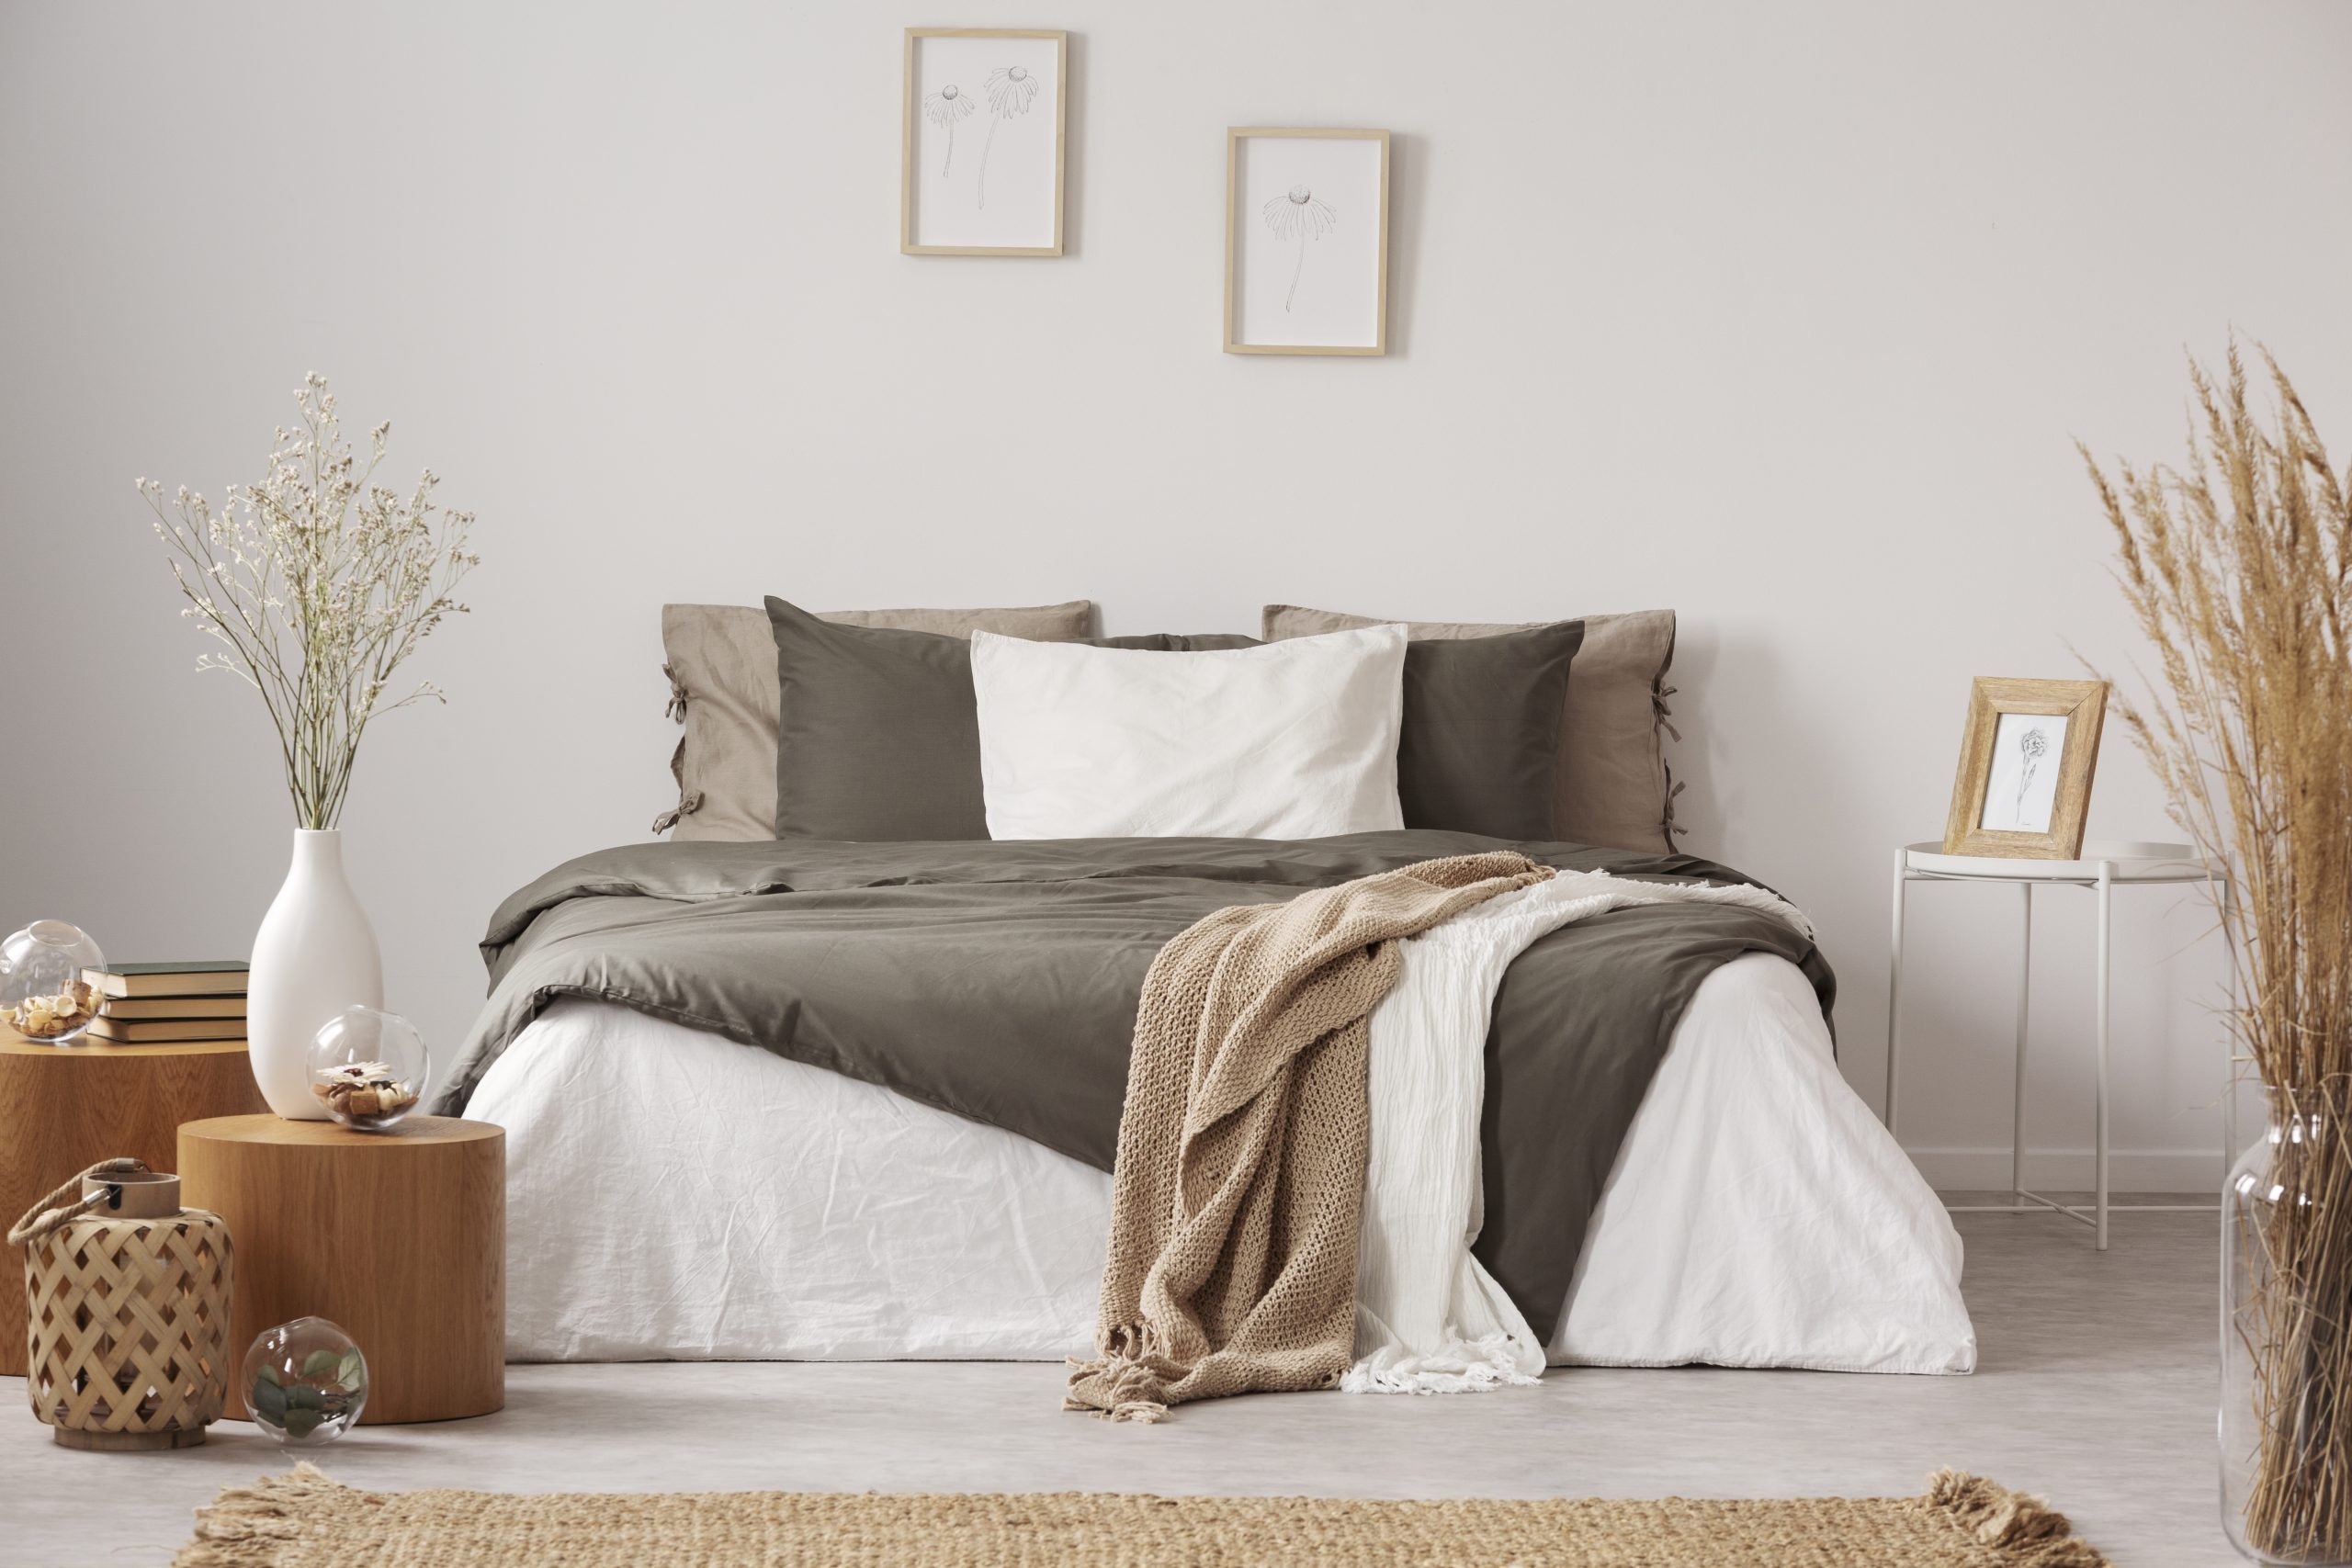 How To Determine The Most Comfortable Bed Design For Your Needs